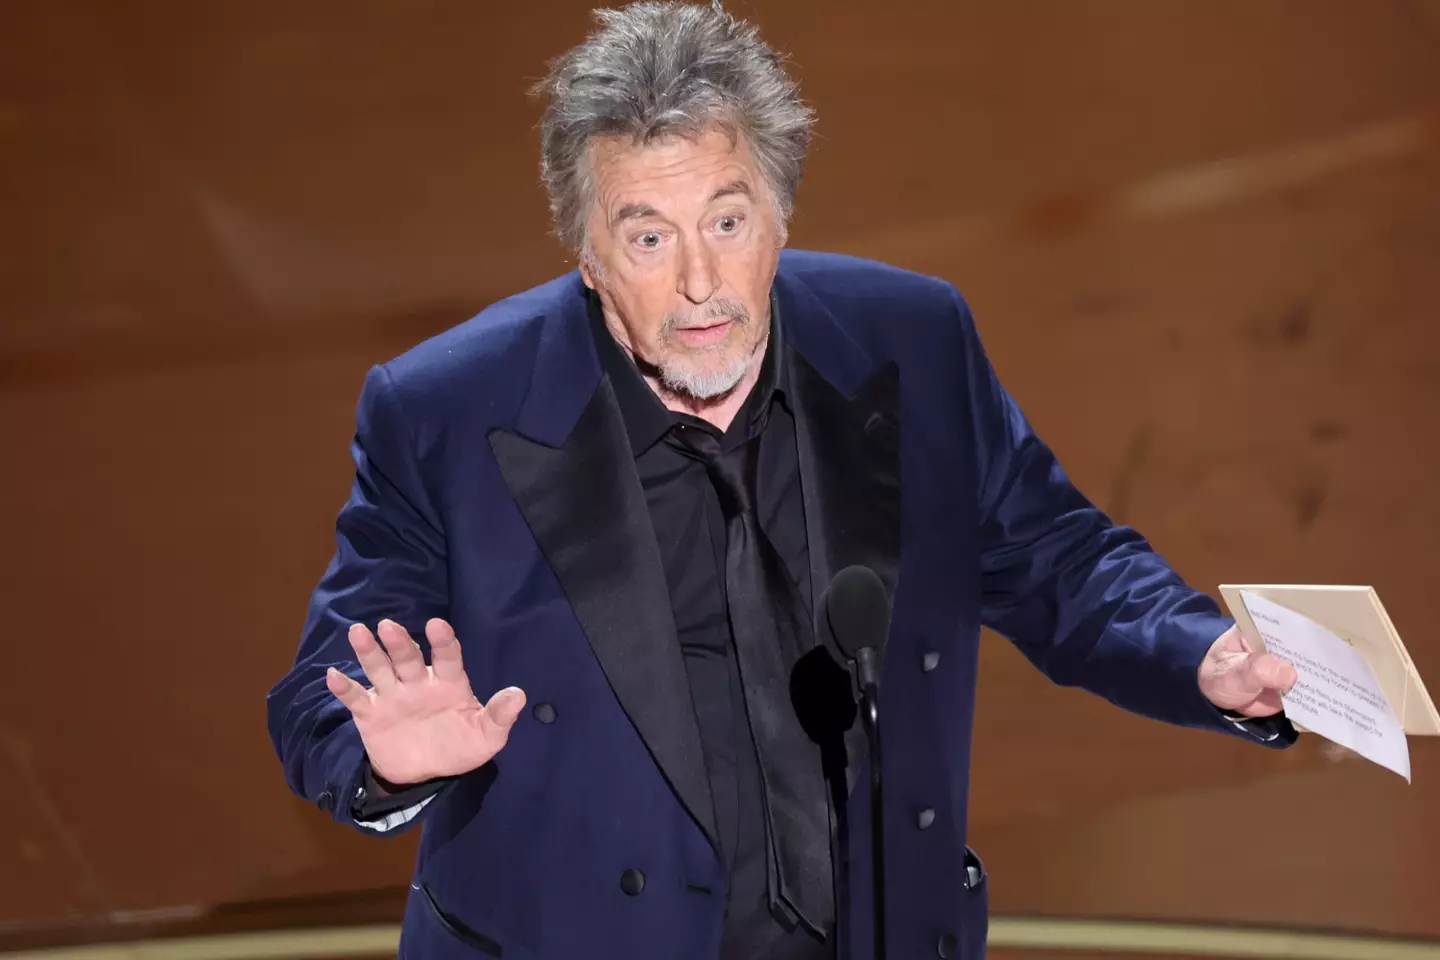 Al Pacino has since issued a statement.